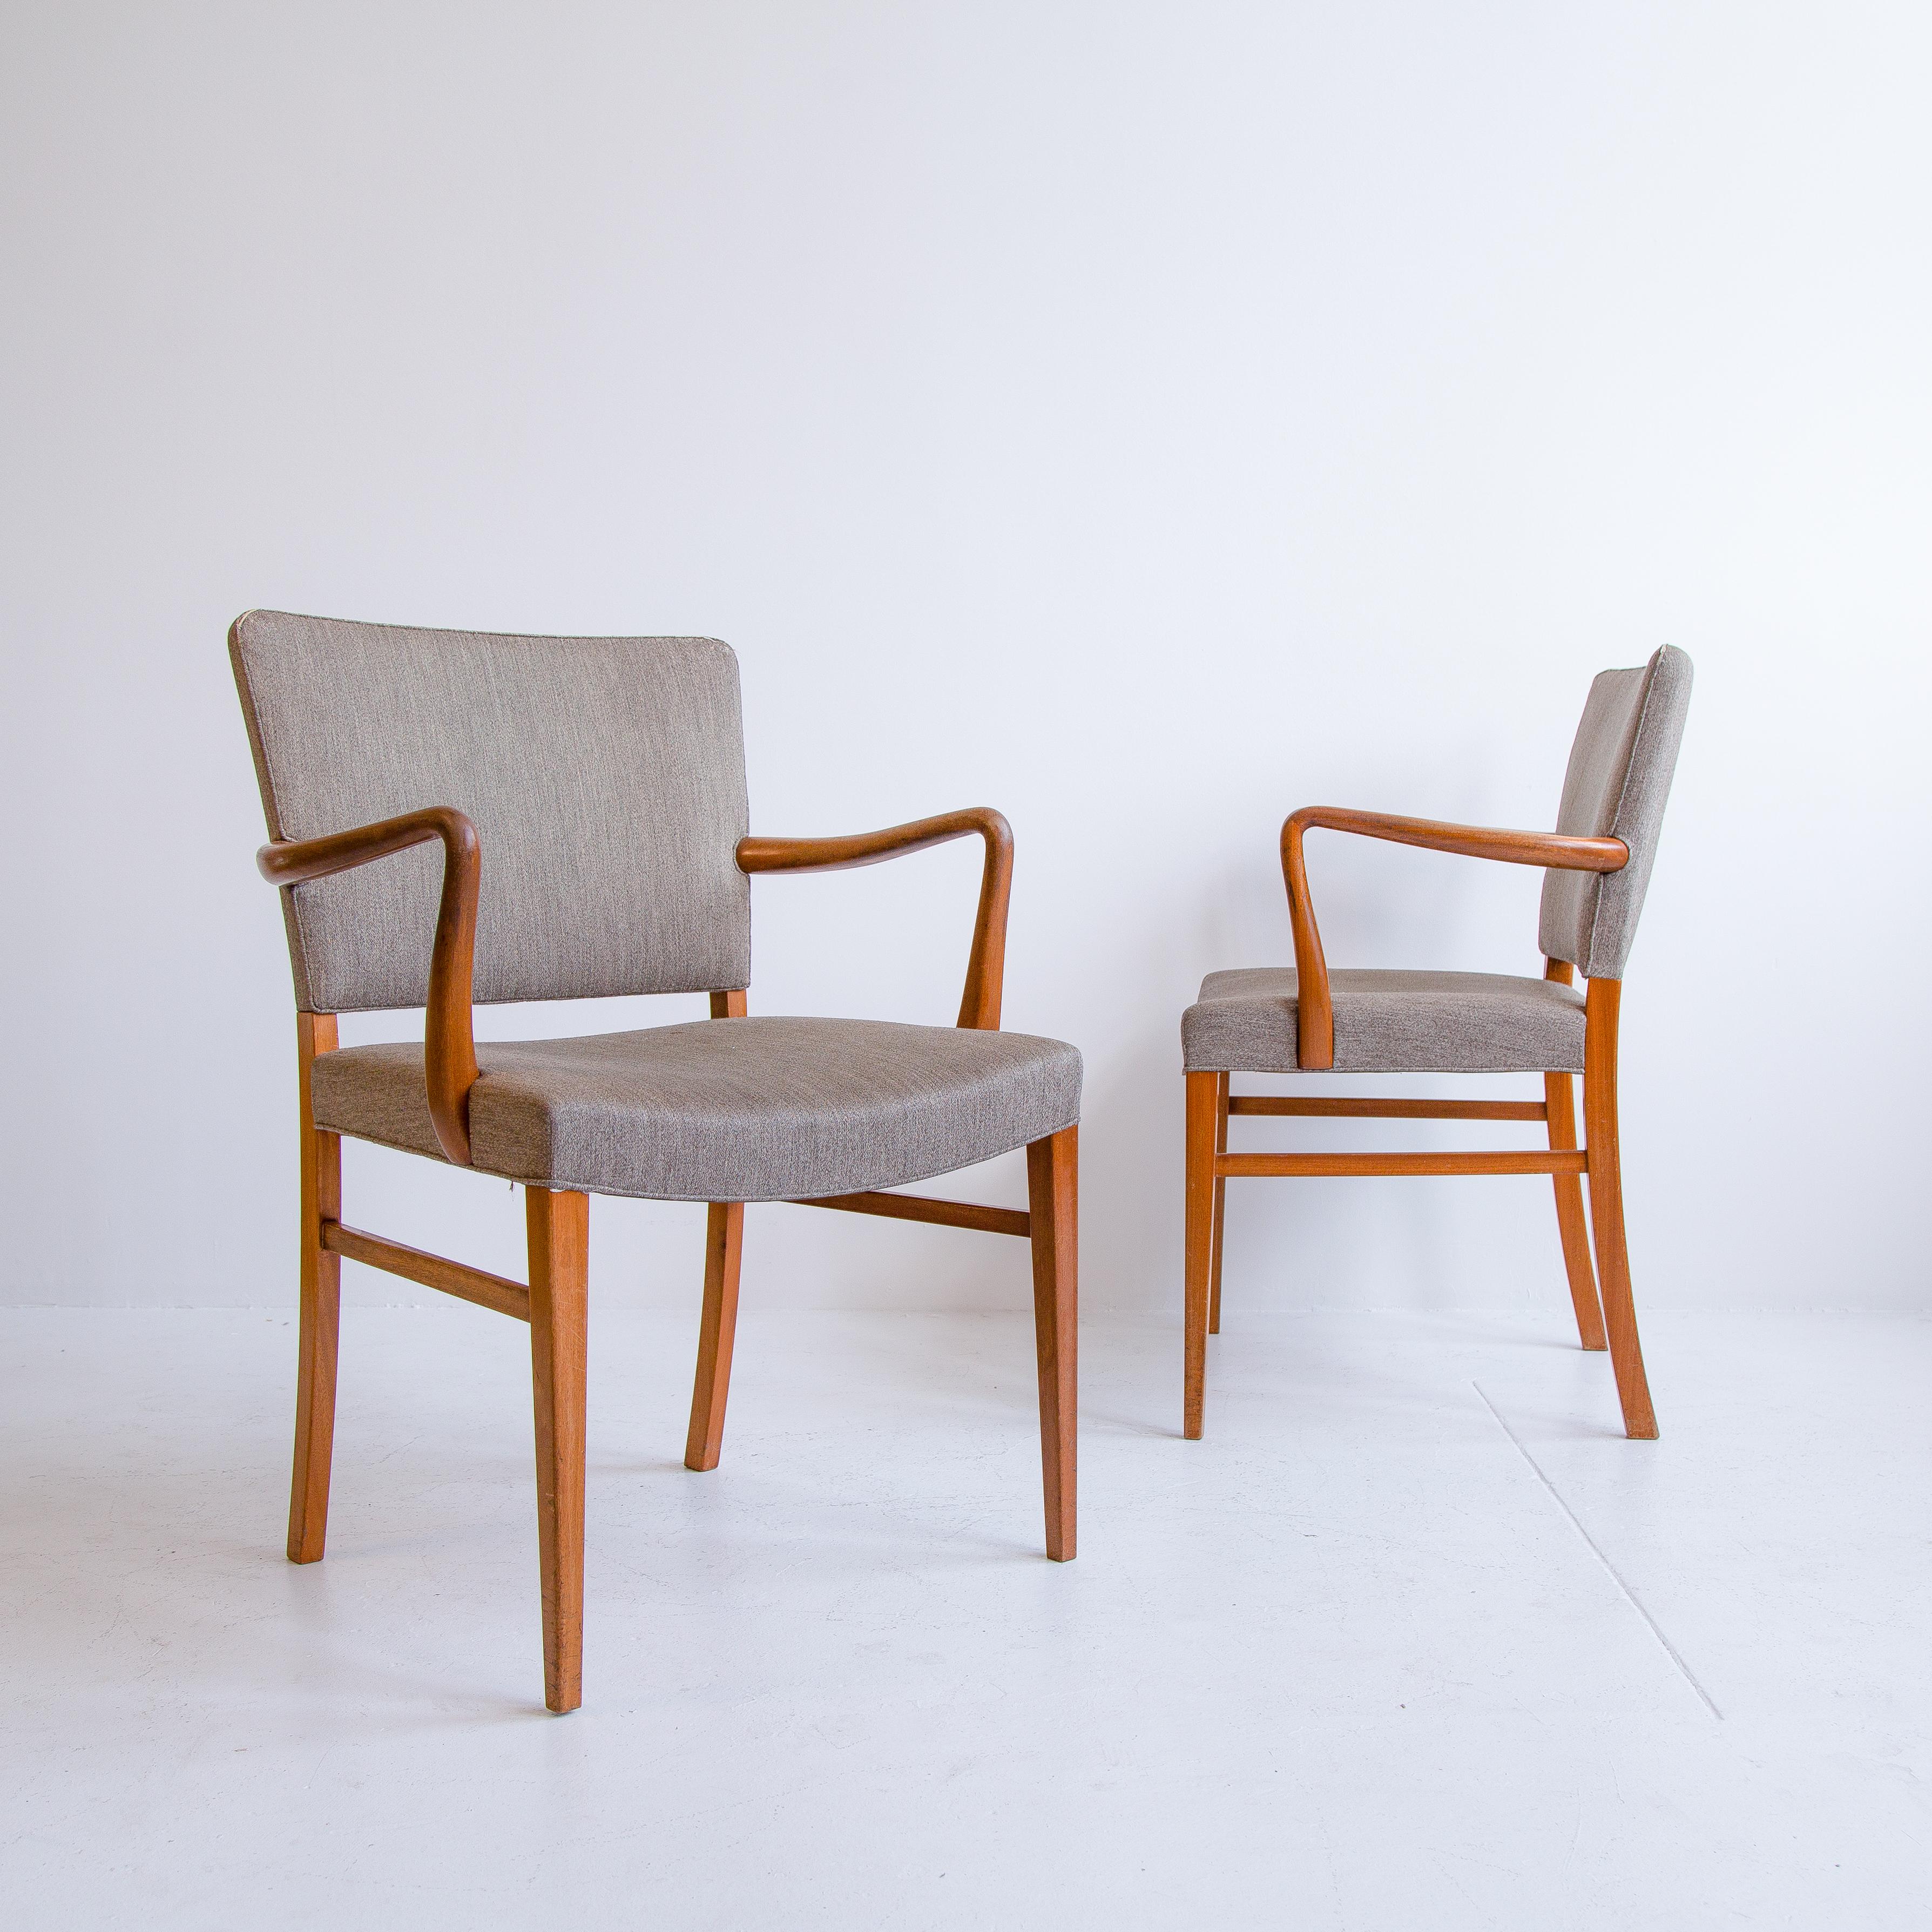 A matching pair of vintage Ole Wanscher designed armchairs manufactured by A.J. Iversen in Denmark in the 1950s. These chairs feature a solid beech wood frame with flowing curved arms and back legs. The wood frame has developed a beautiful vintage